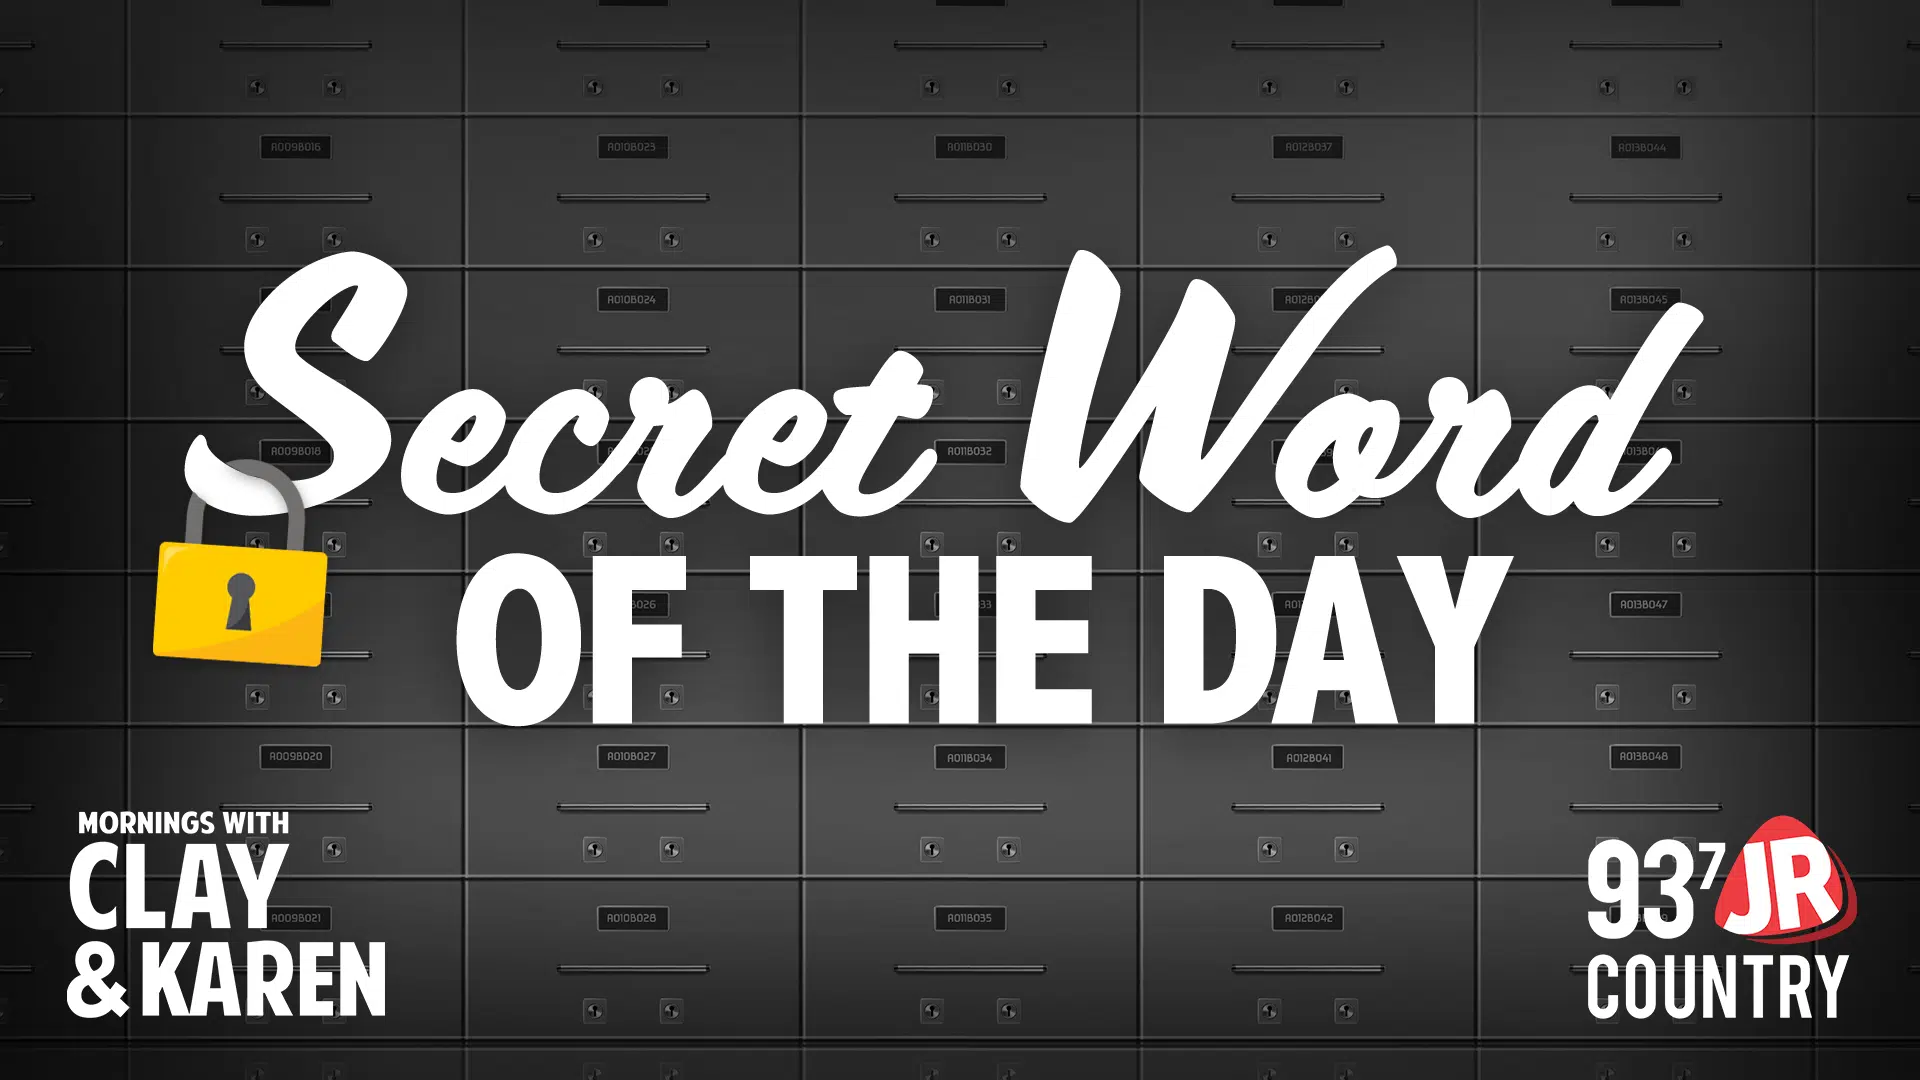 Play Secret Word Of The Day With Clay & Karen